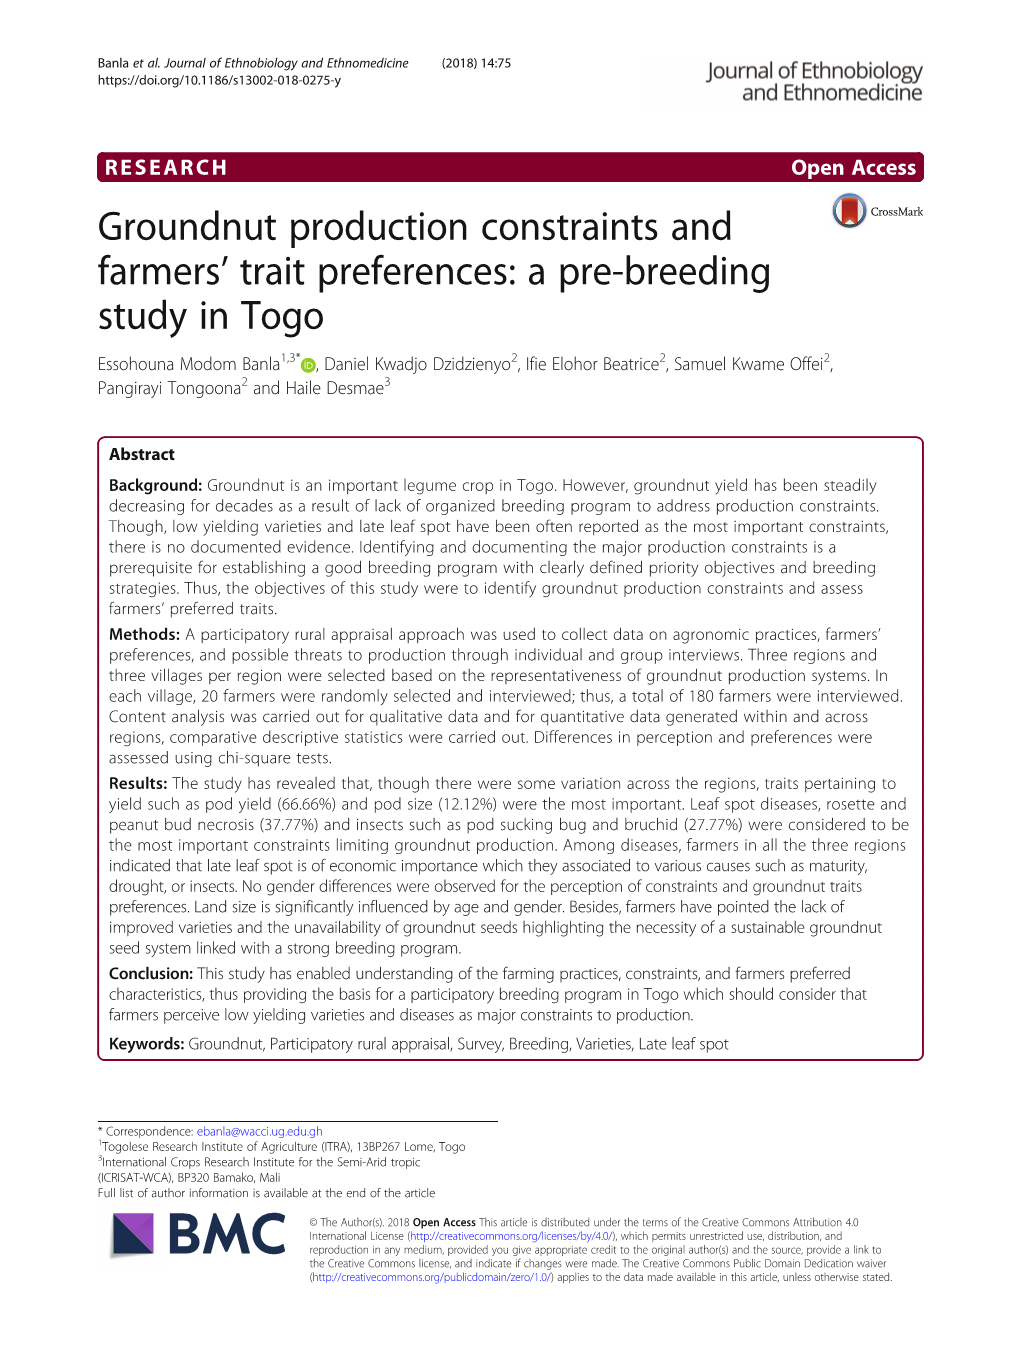 Groundnut Production Constraints and Farmers' Trait Preferences